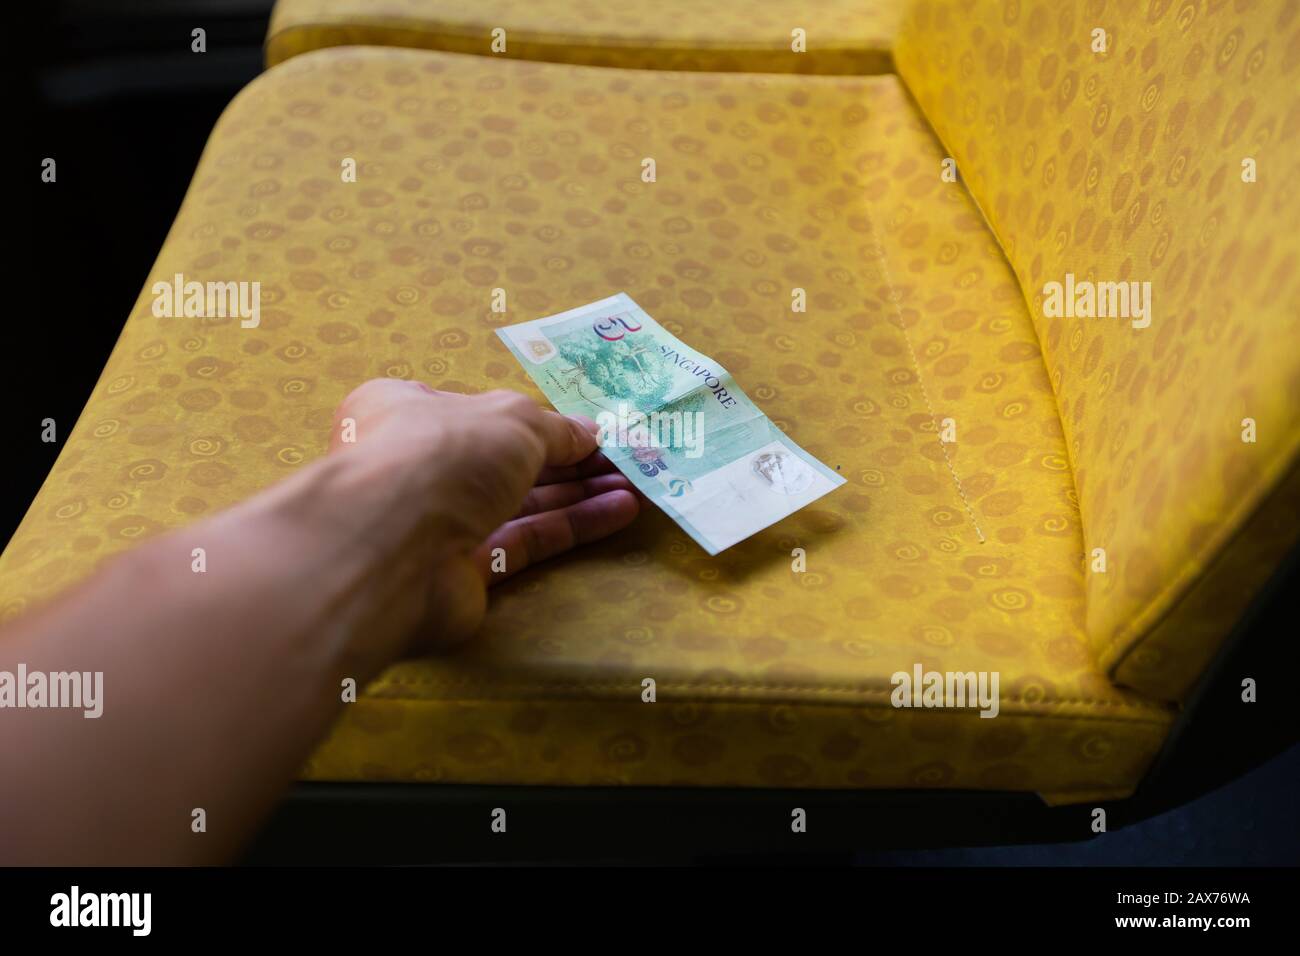 A hand stretch out to take the Singapore five dollar note on the bus seat. Stock Photo